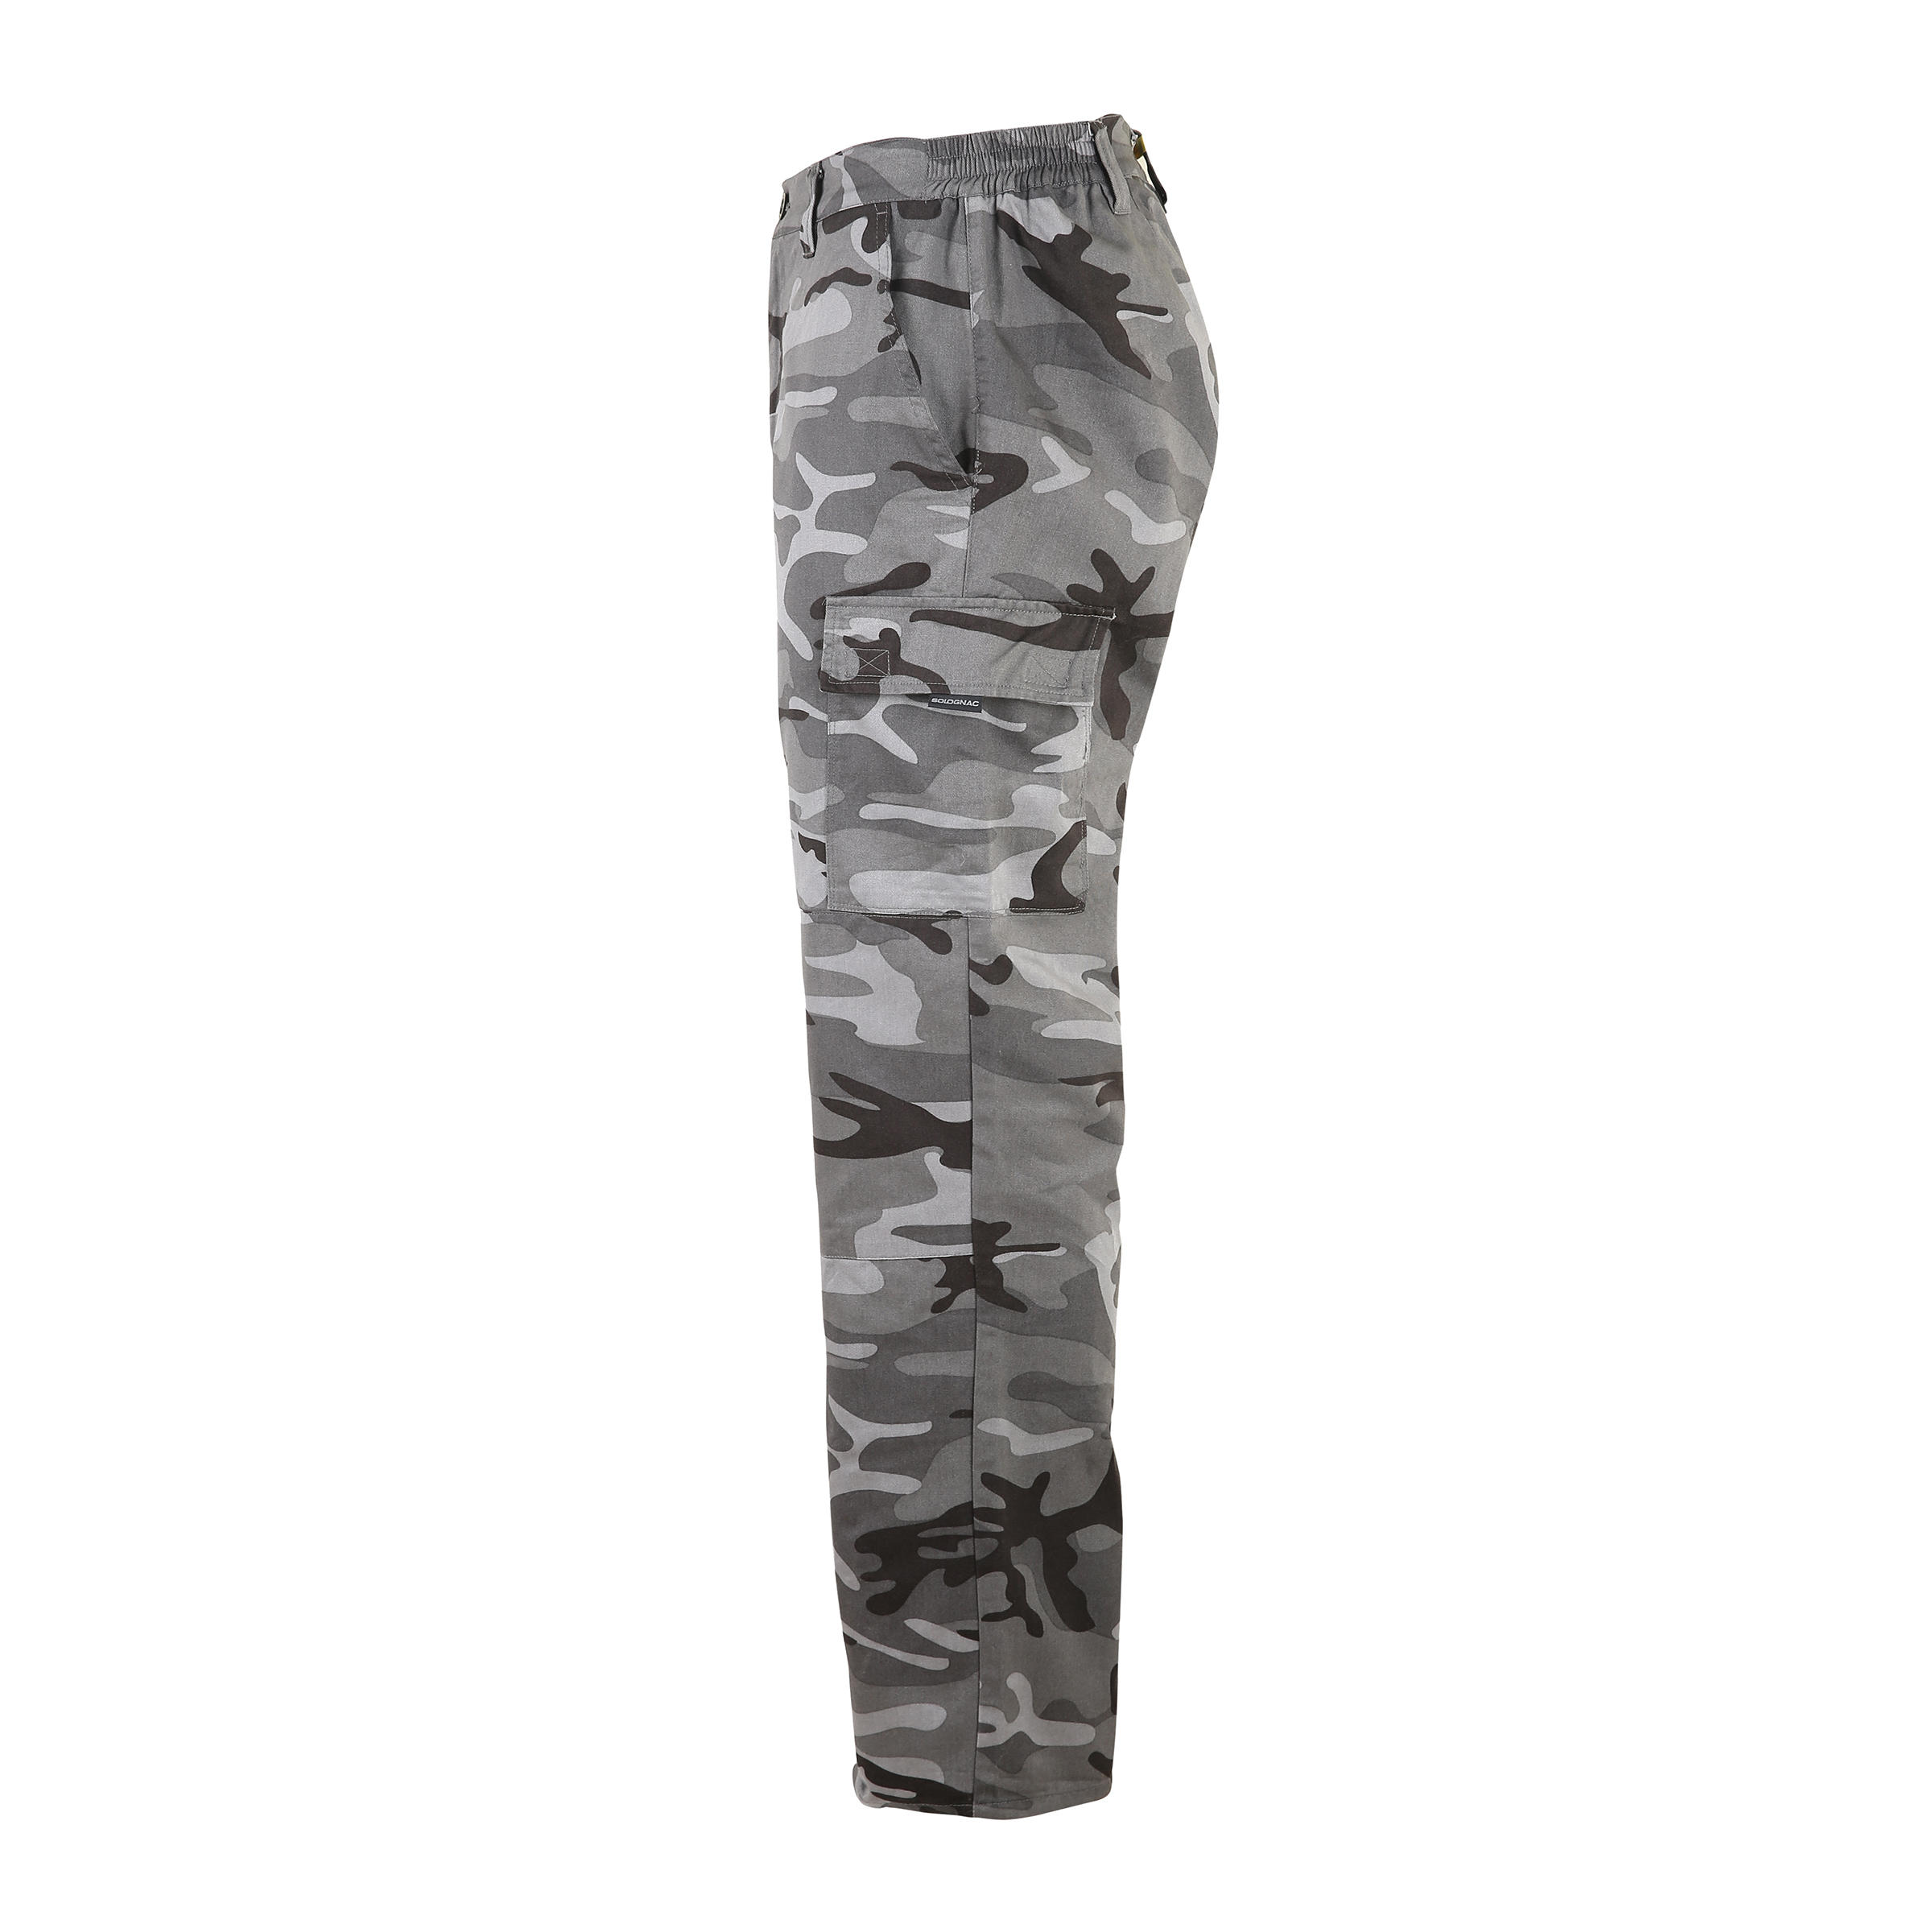 CottonLinen Mens Army Cargo Pant camoufladge